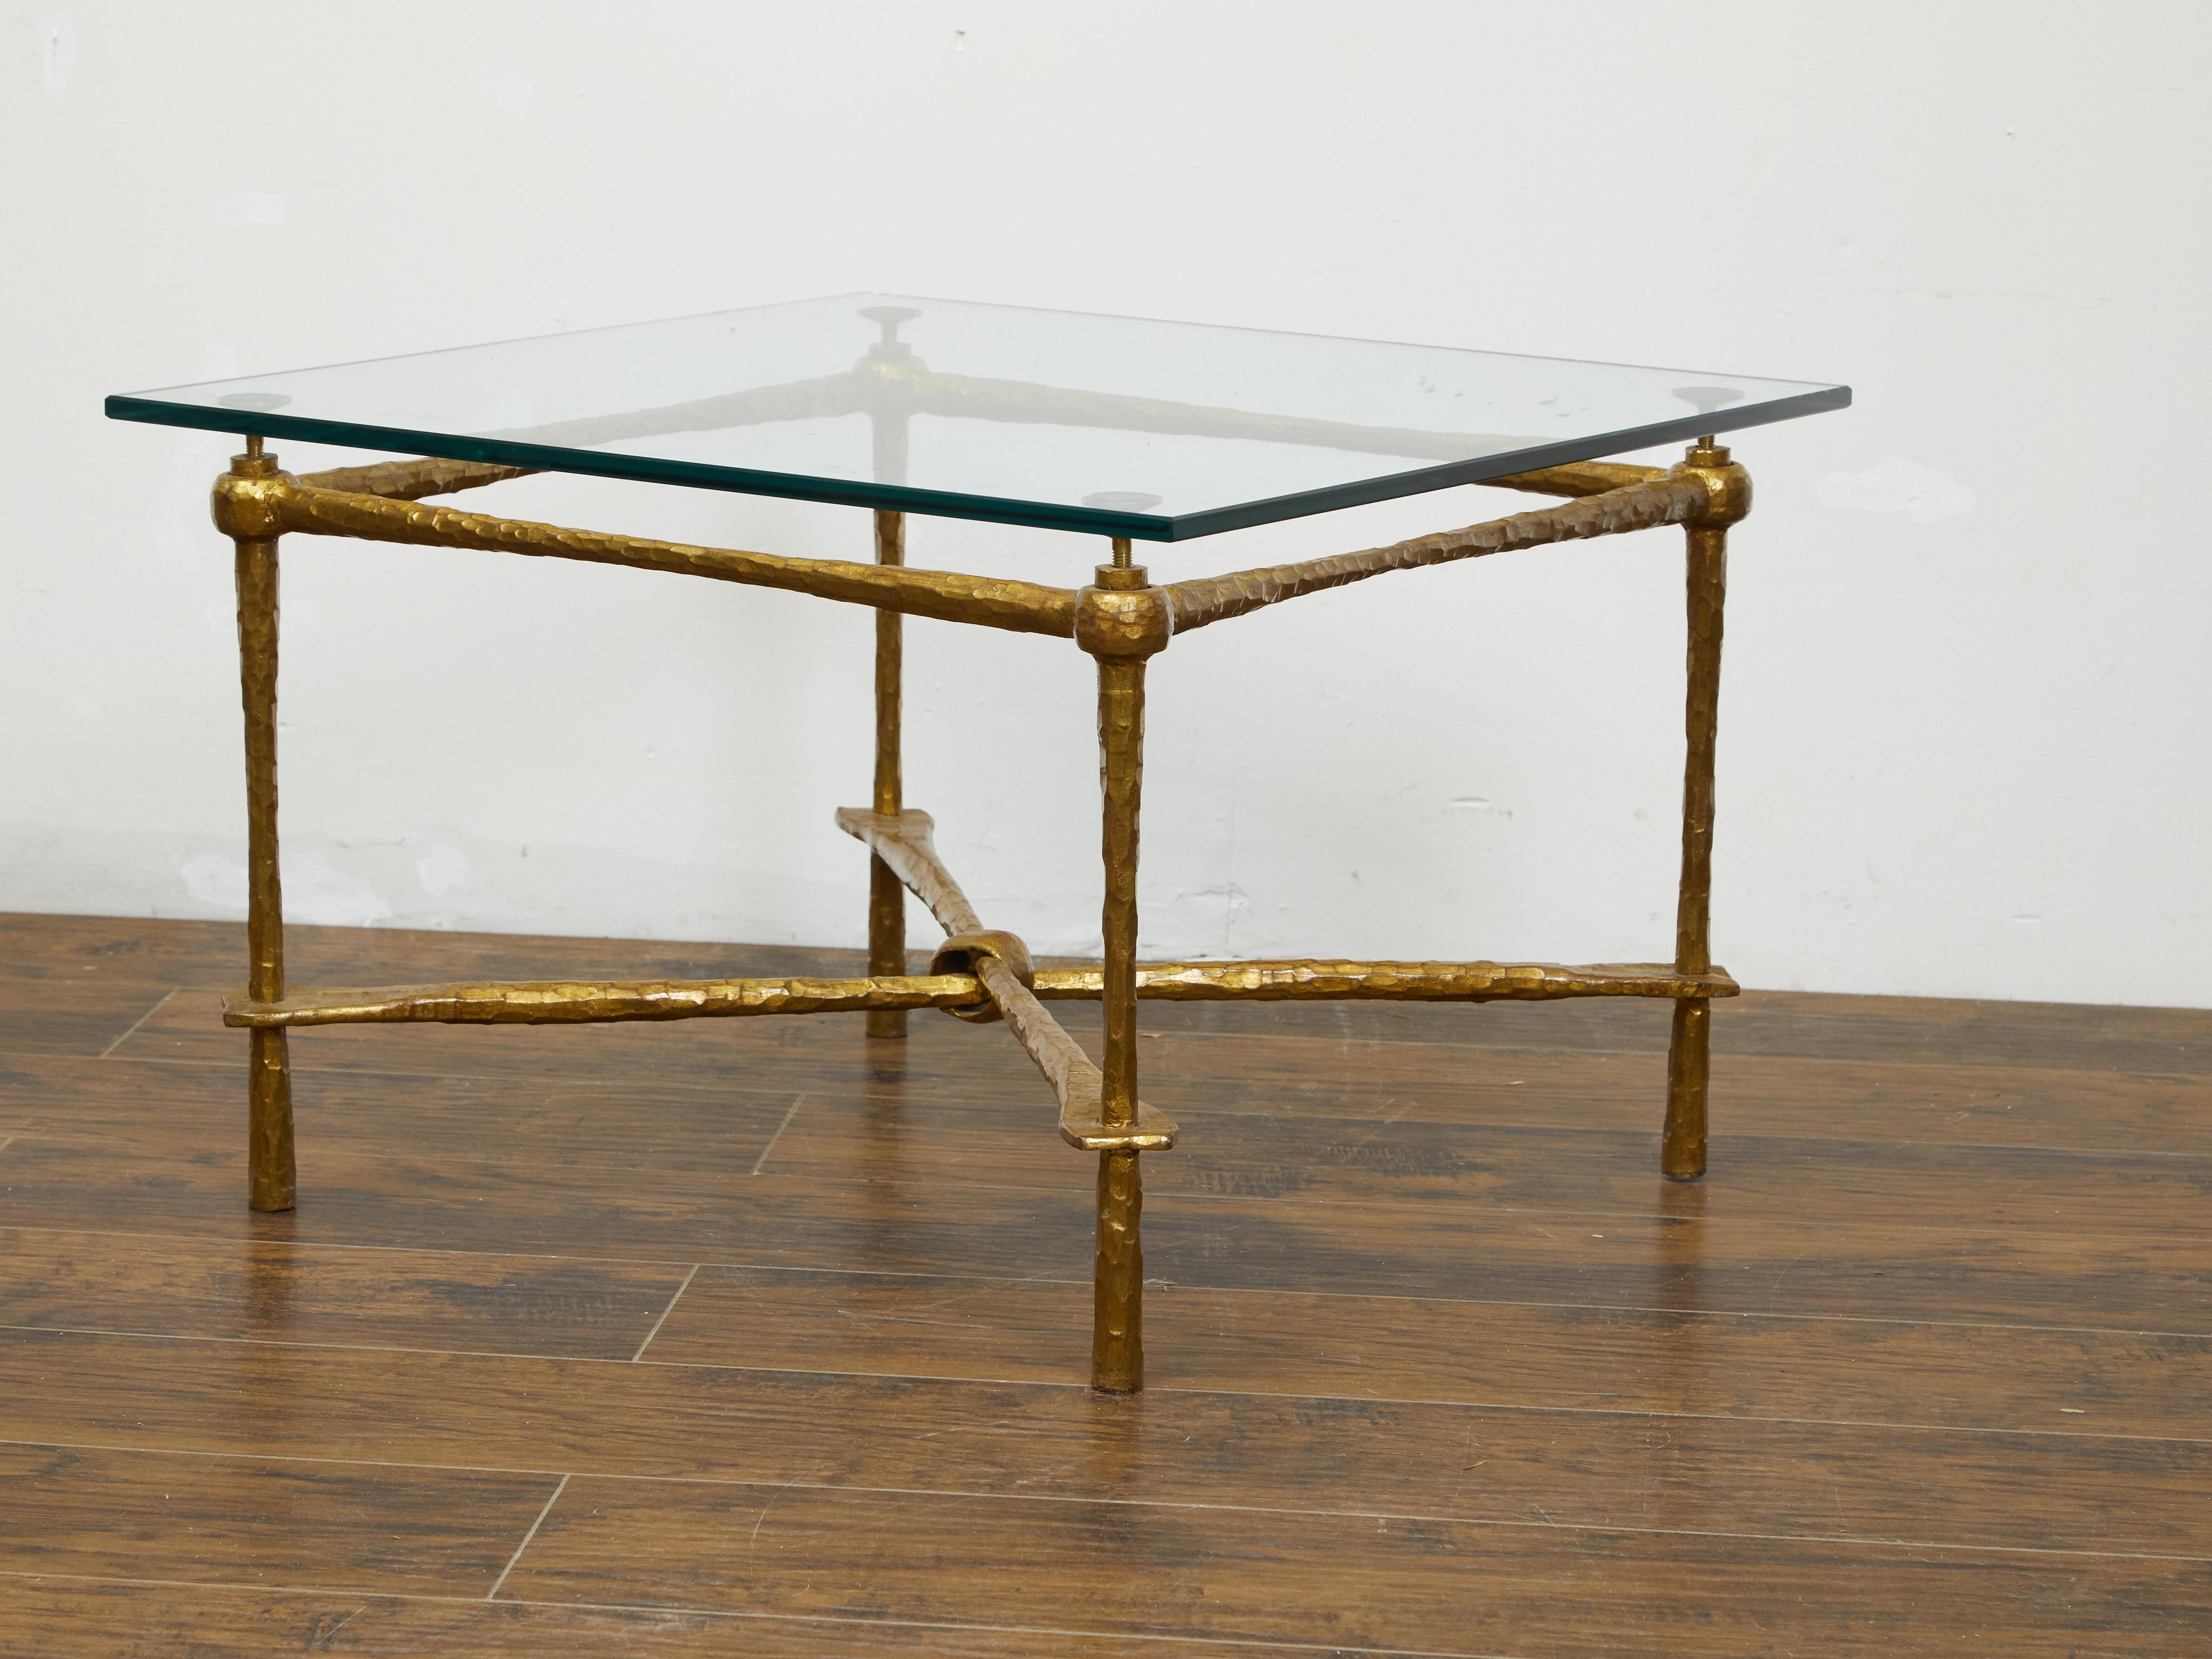 Italian Midcentury Gilt Metal Coffee Table with Glass Top and Hammered Accents For Sale 1